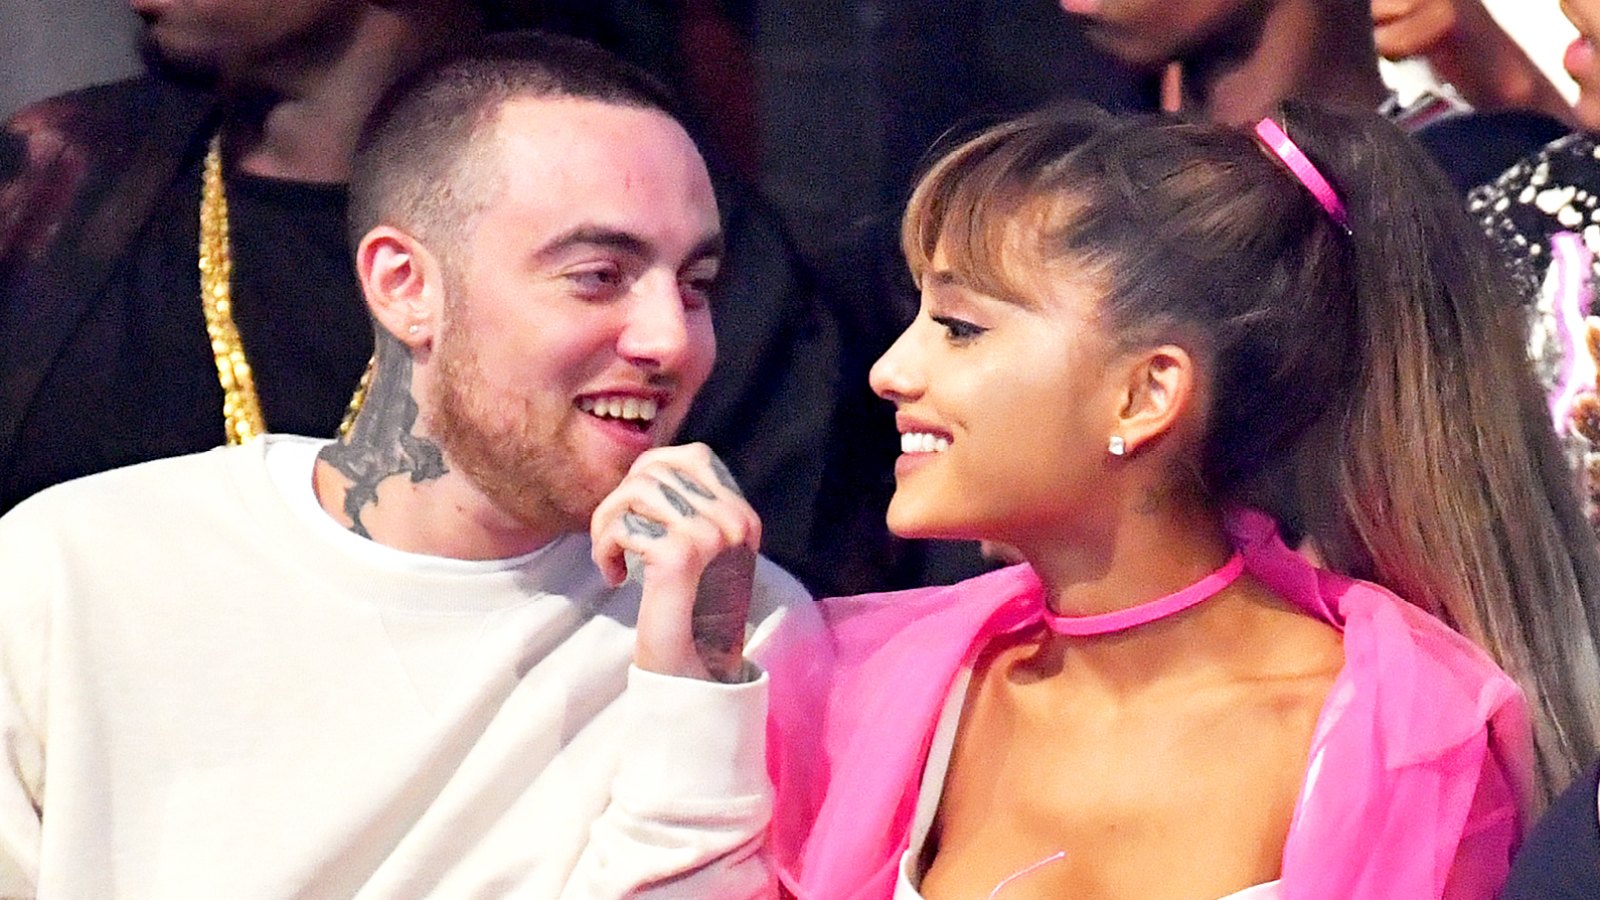 Mac Miller and Ariana Grande attend the 2016 MTV Video Music Awards at Madison Square Garden in New York City.